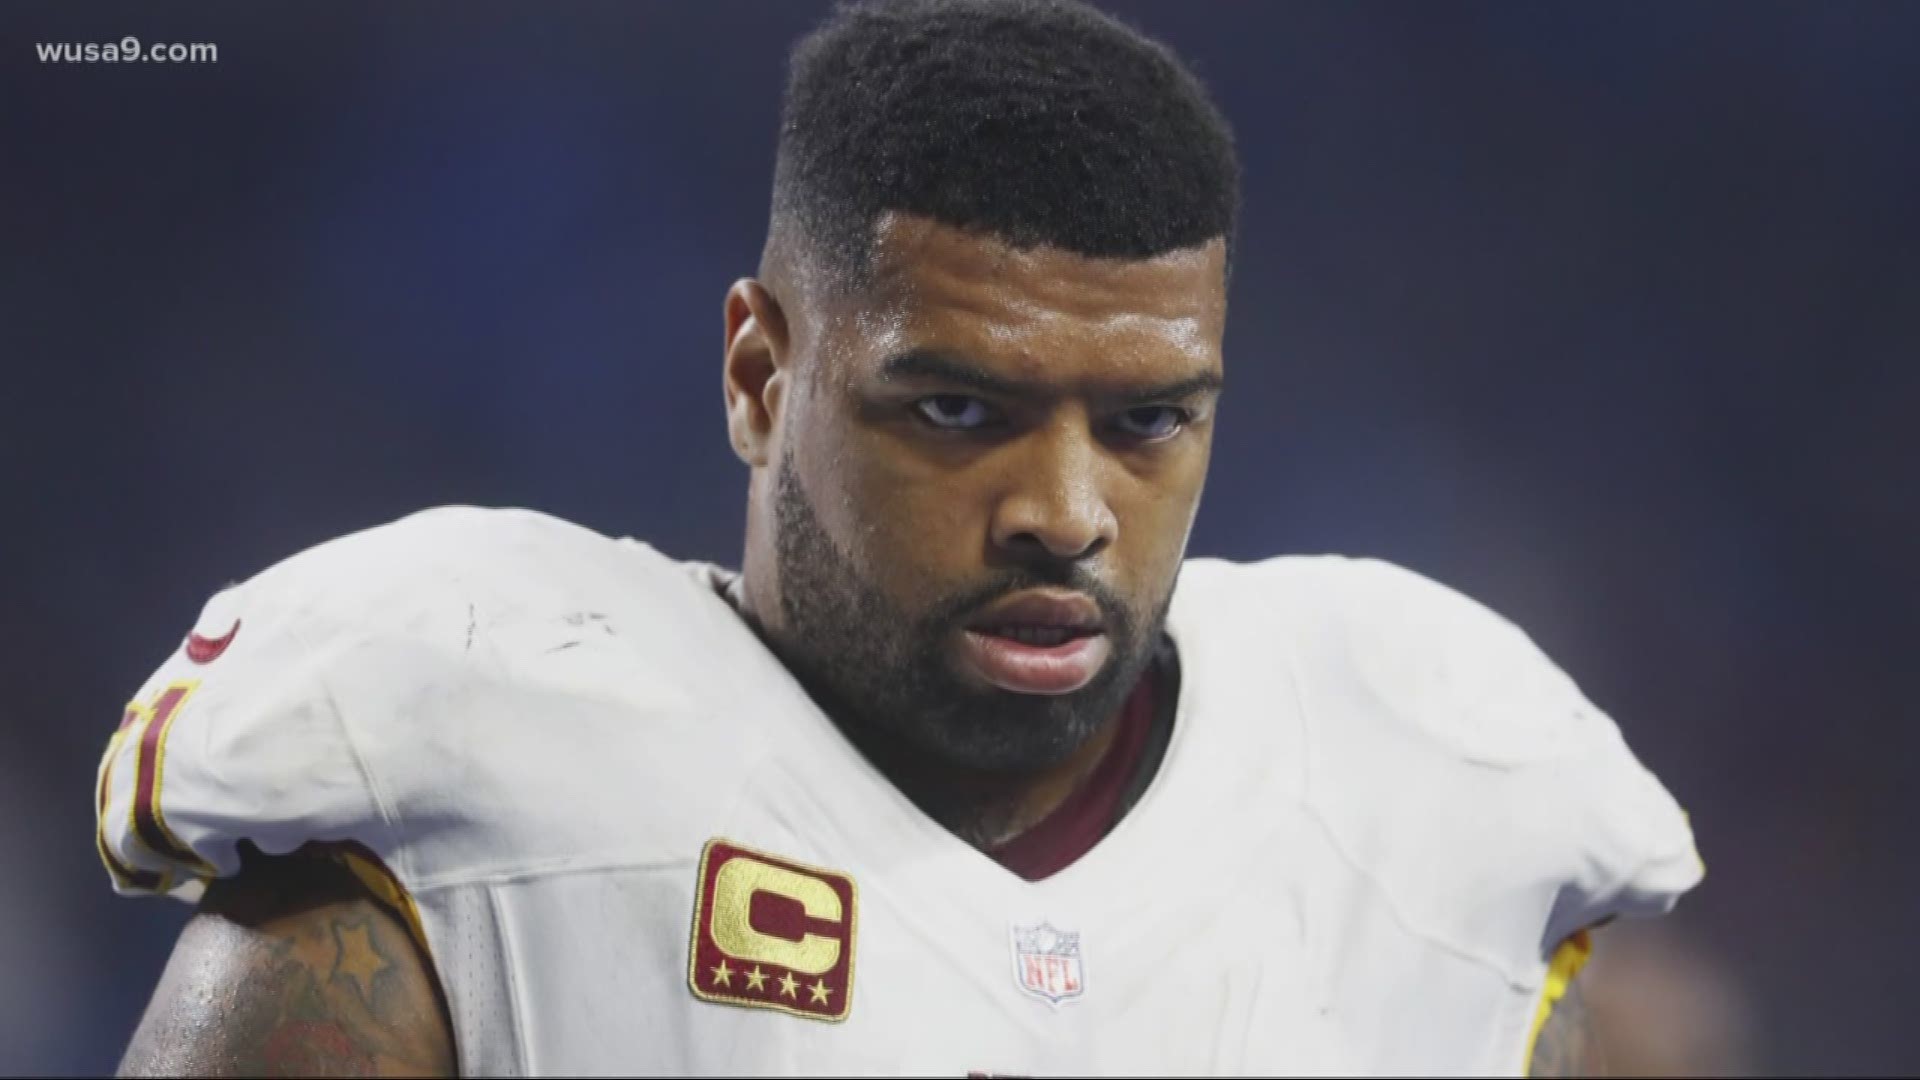 Redskins lineman Trent Williams made it very clear - after displeasure with the team, he is not going to play for the redskins moving forward.